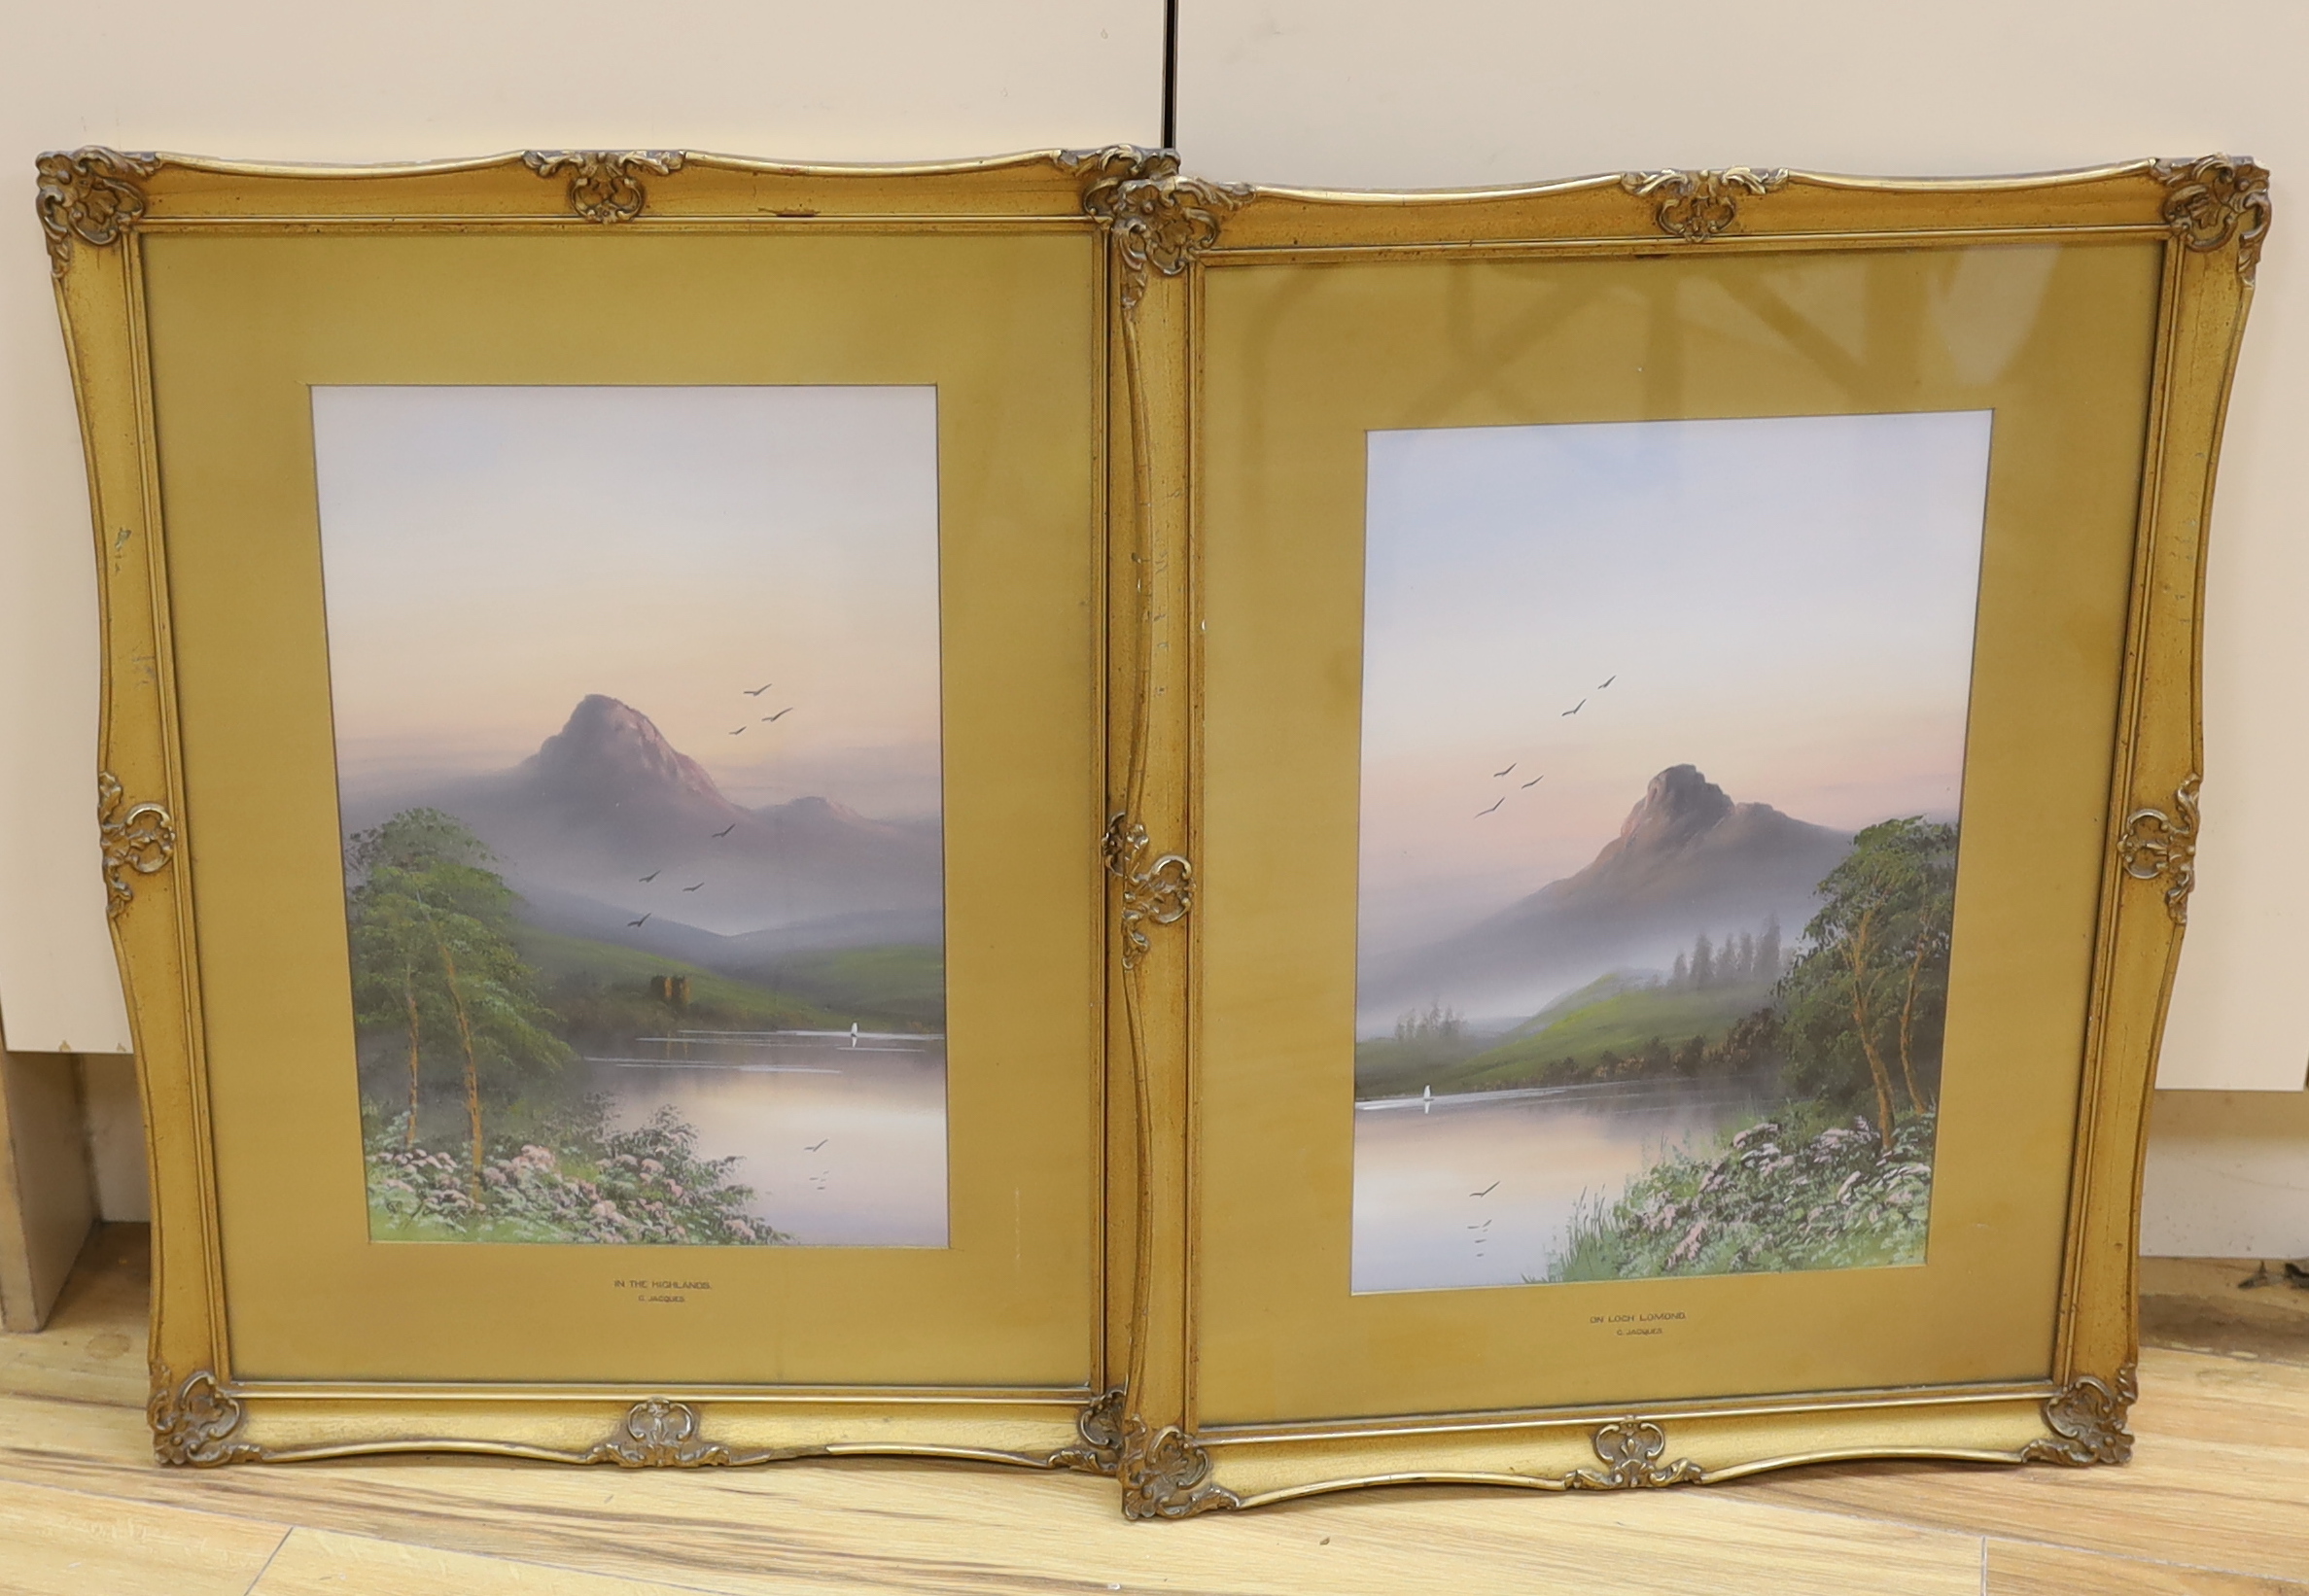 C. Jacques, pair of gouaches, ‘On Loch Lomond’ and ‘In the Highlands’, each signed, 37 x 24cm, ornate gilt framed                                                                                                           